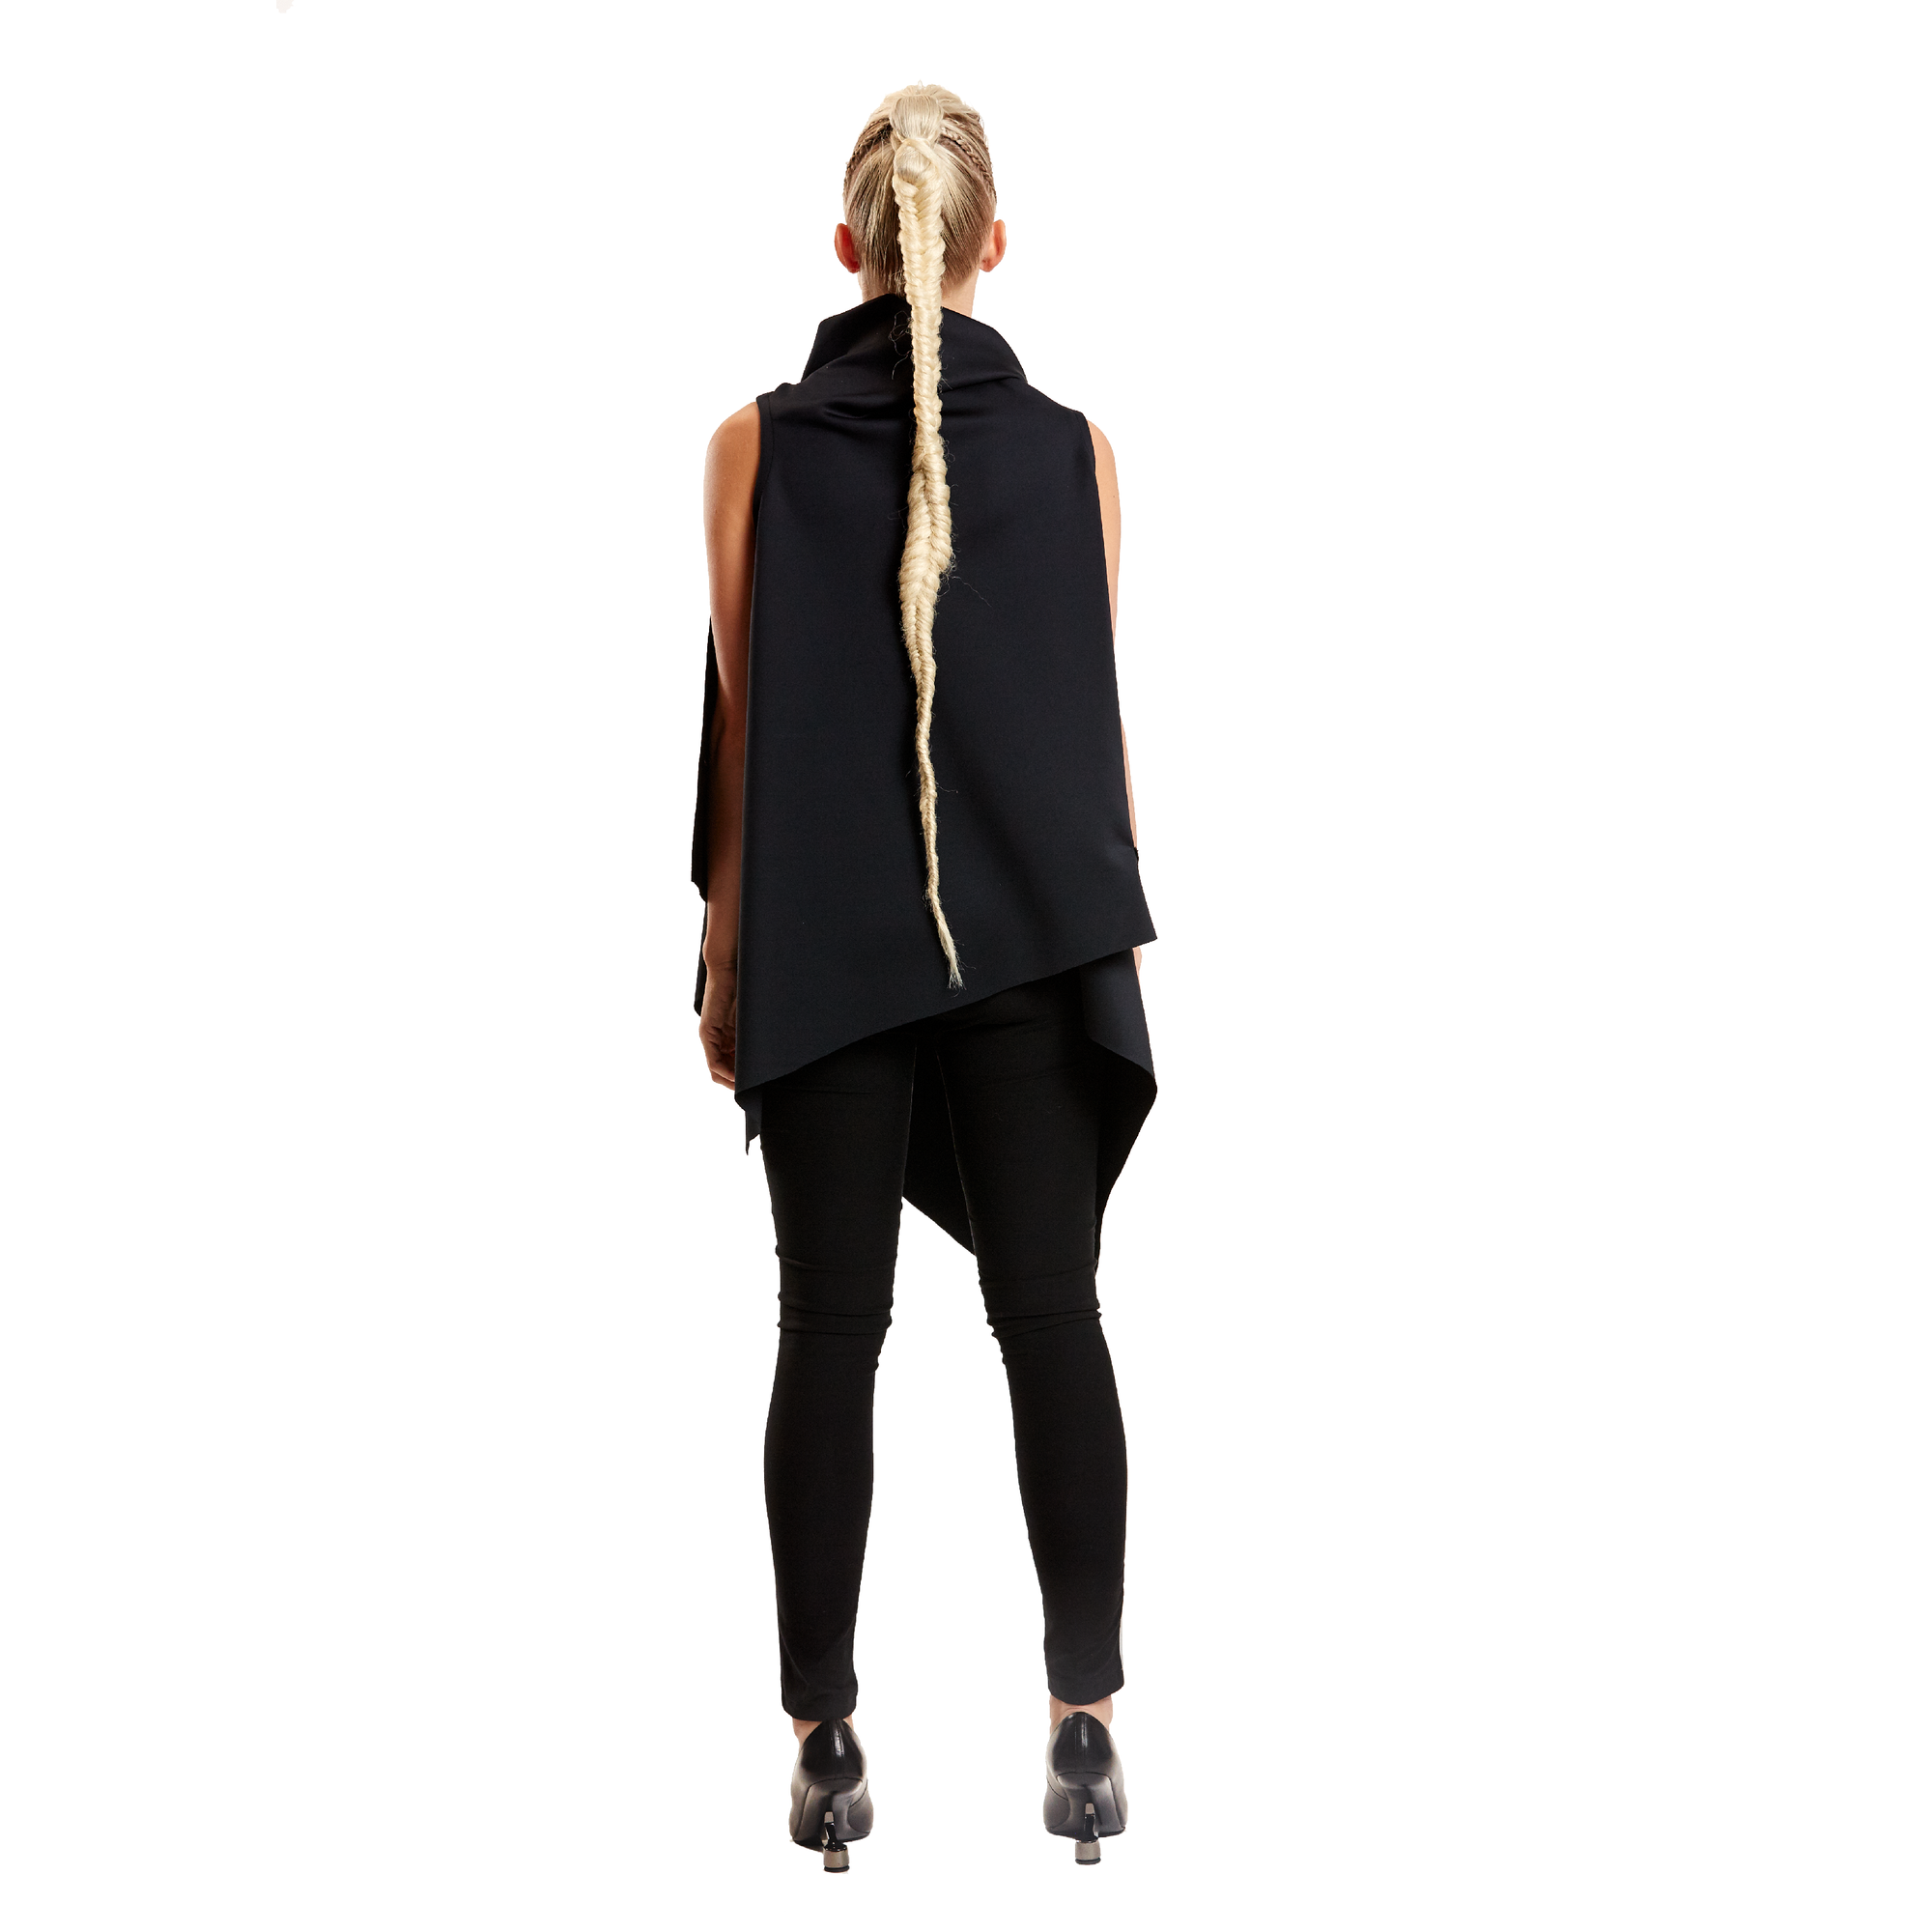 A woman with her back turned wearing a black asymmetrical vest by Malaika New York